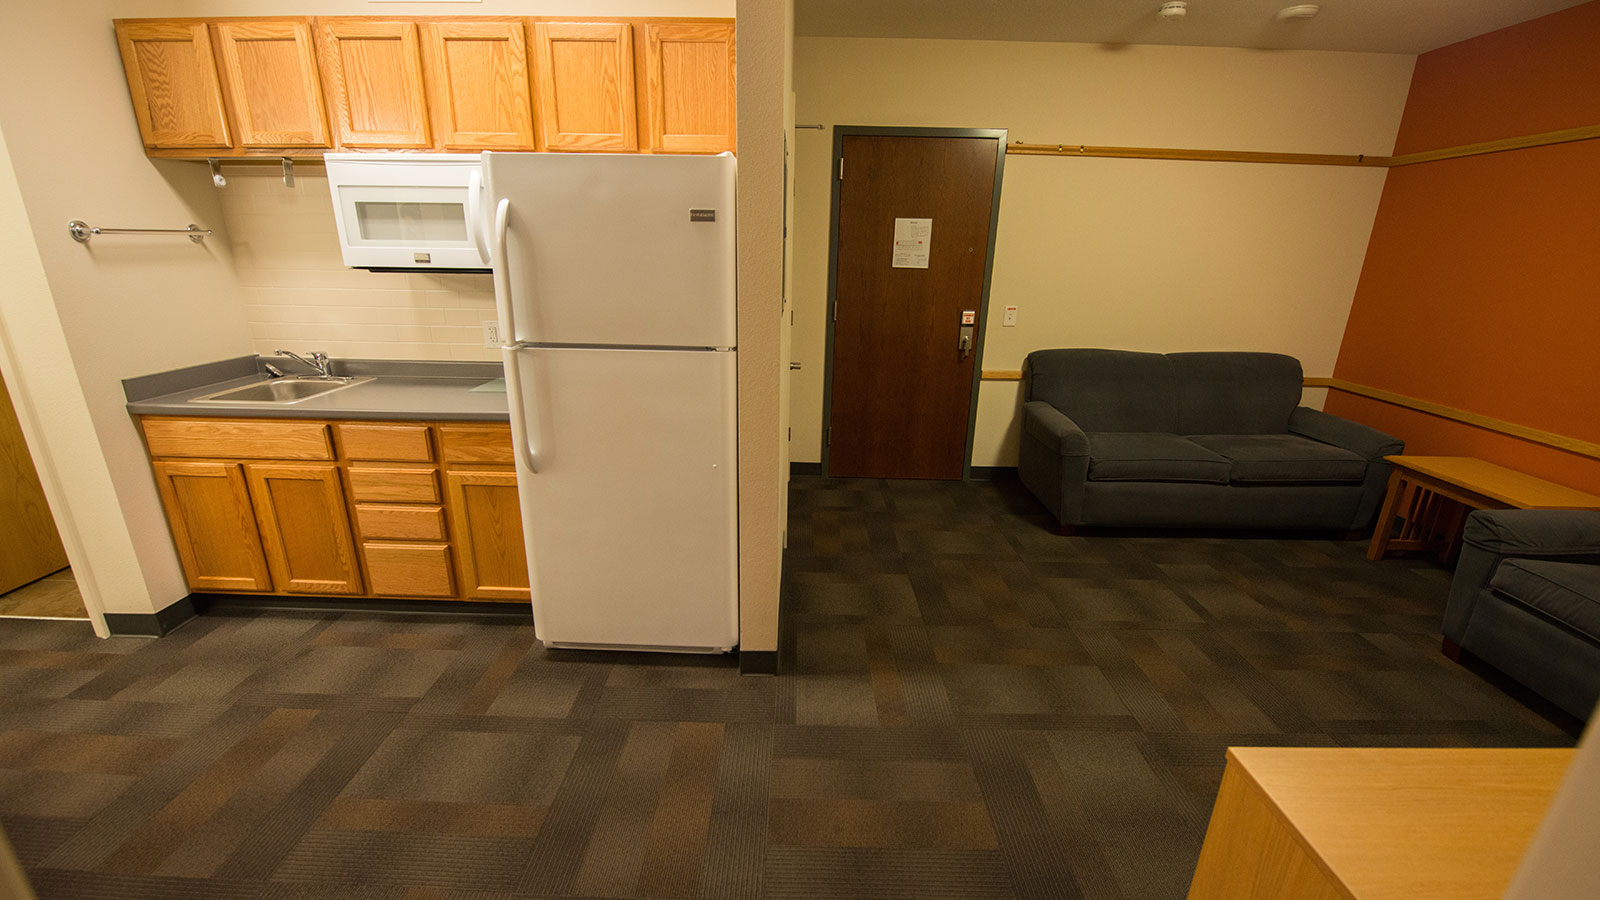 Living and kitchenette in the guest housing dorm.